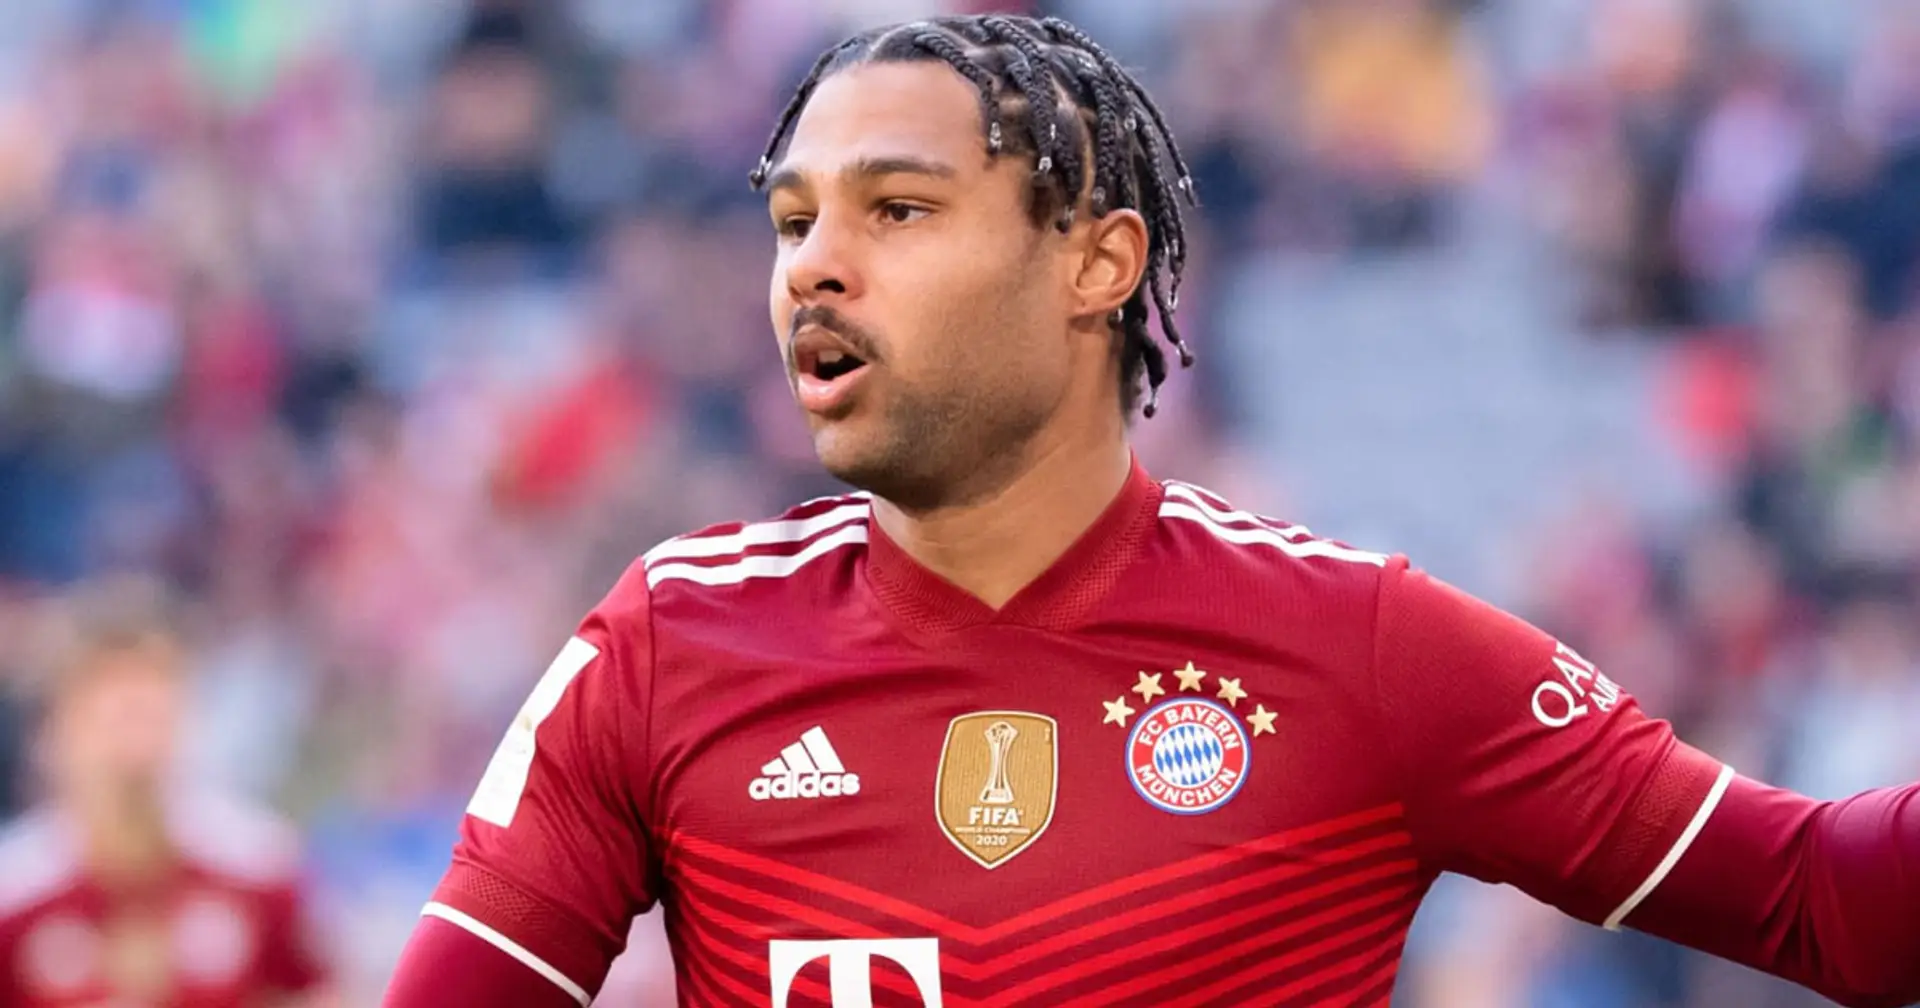 Madrid won't make Gnabry move and 2 more big stories you could've missed